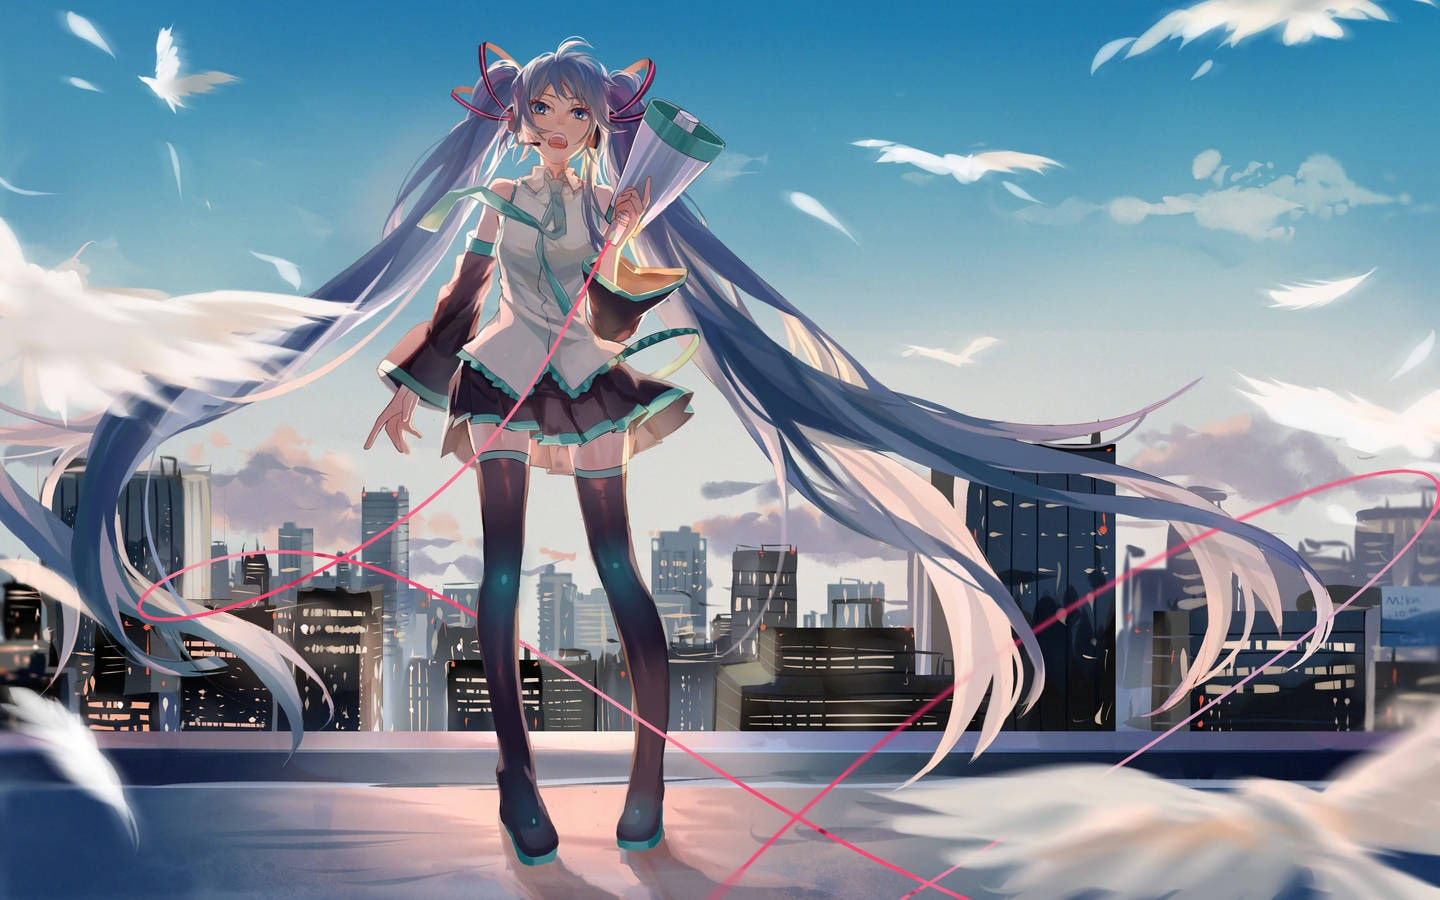 'a Vocaloid Avatar Singing Her Fantastical Song!' Background